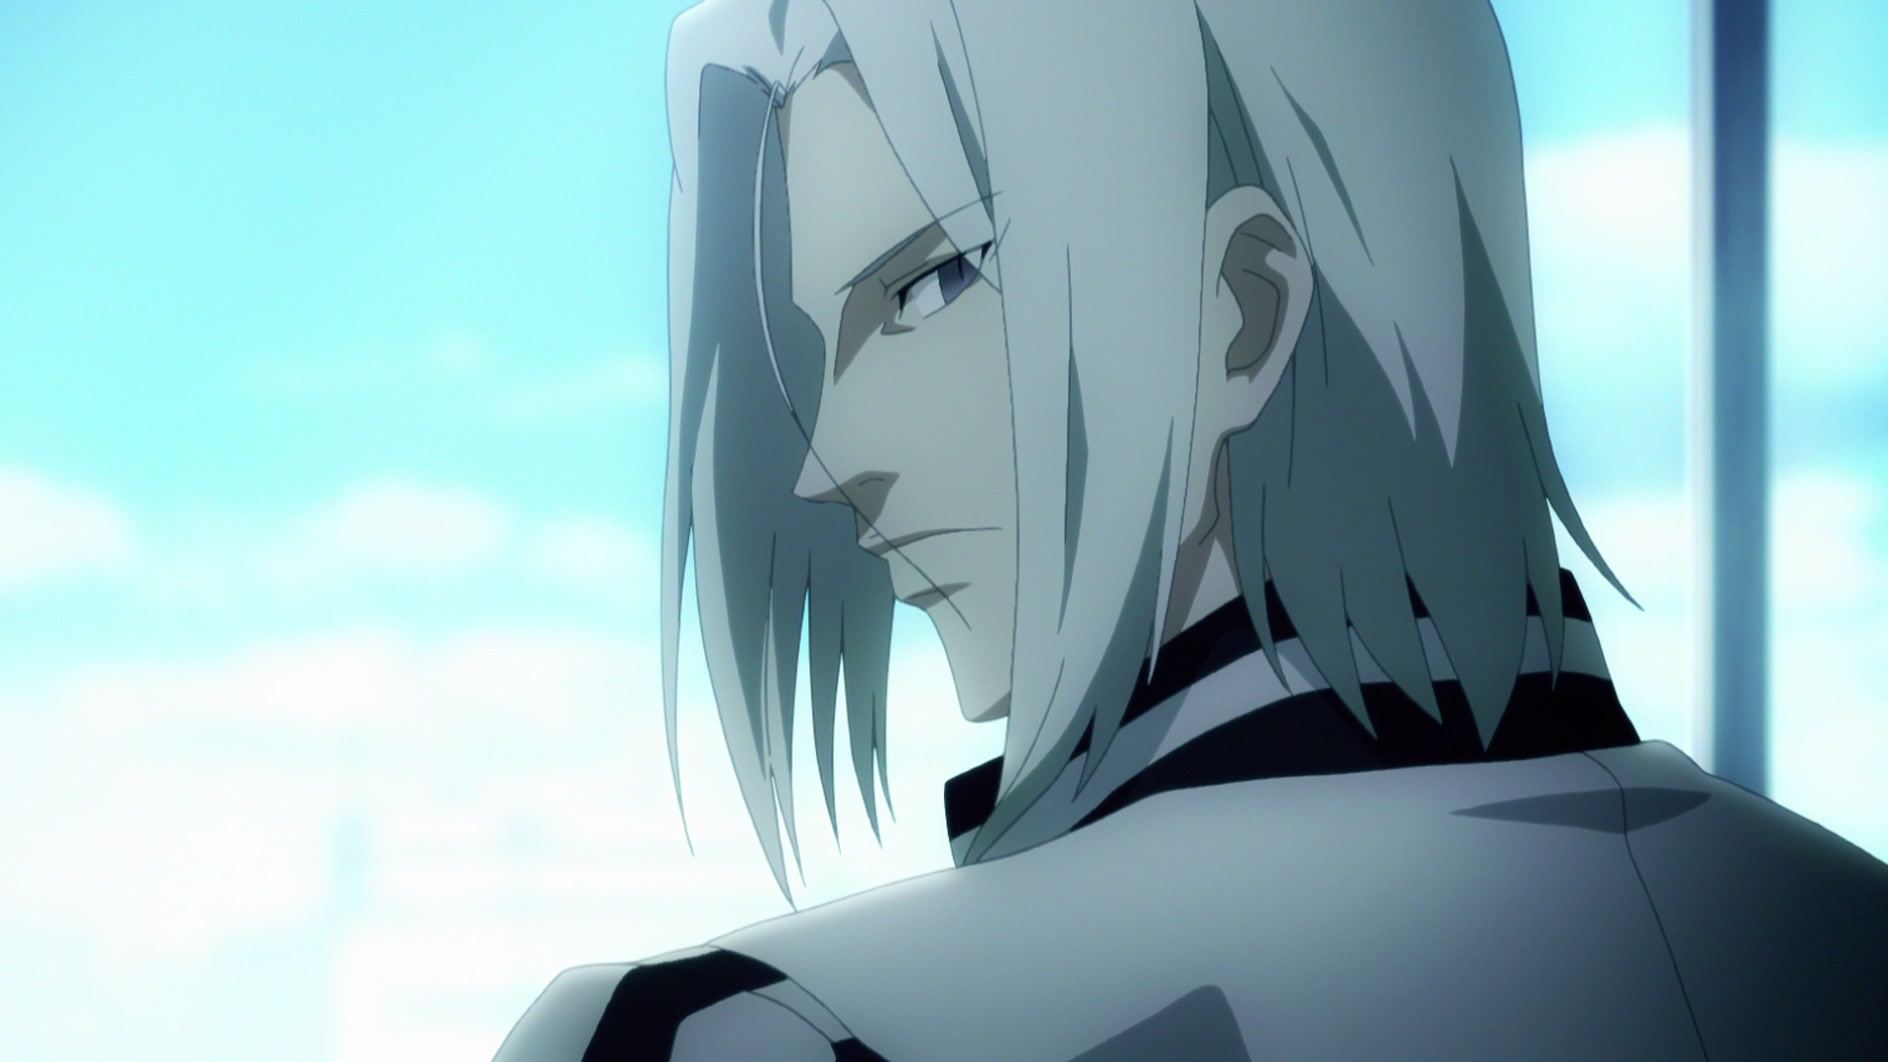 Fate Zero Dubbed Episode 19 Where Justice Dwells Watch On Crunchyroll